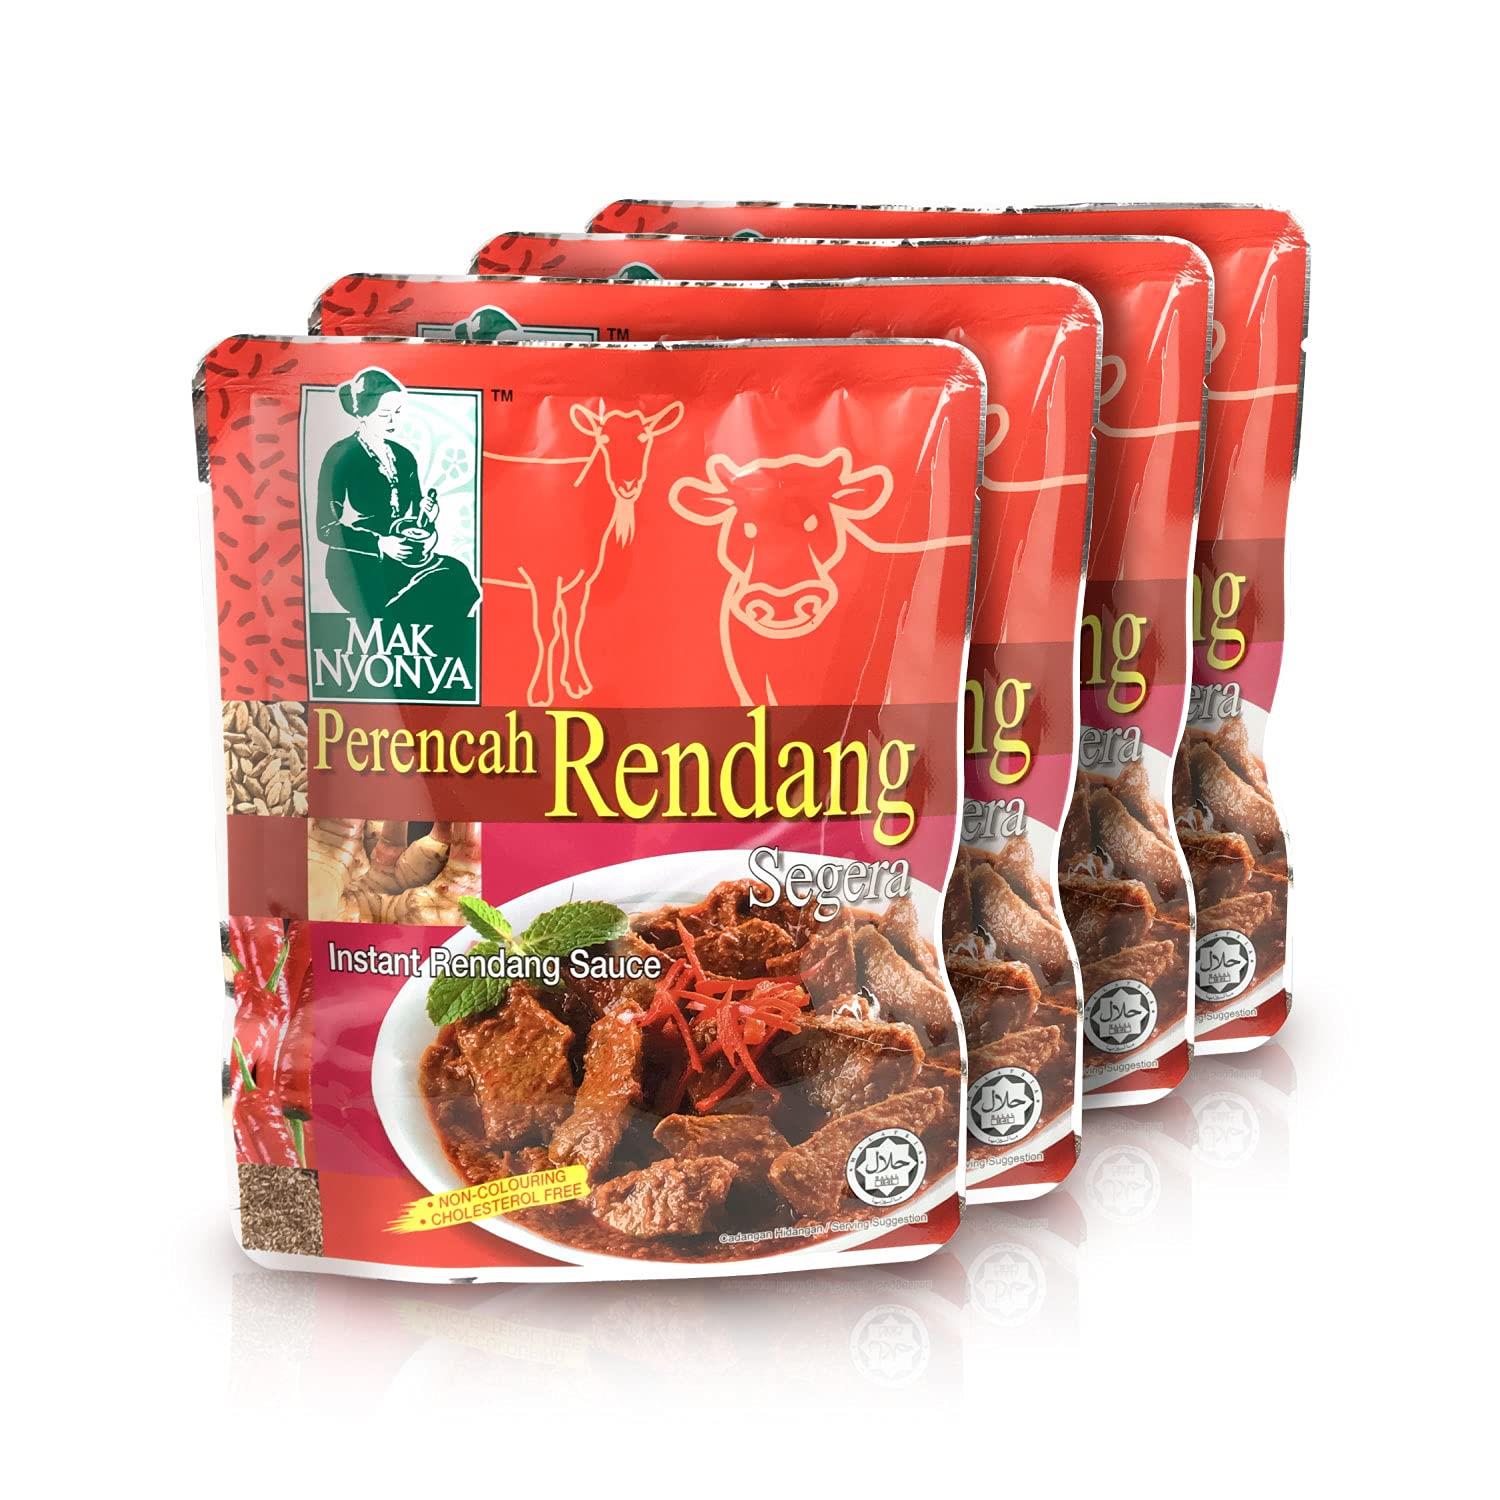 Mak Nyonya Instant Rendang Sauce For Beef/Chicken X4 Dry Curry Paste Authentic Rendang Instant Curry Sauce For Beef Chicken Vege Fish Seafood & Other Meat Item 7oz each, 200g